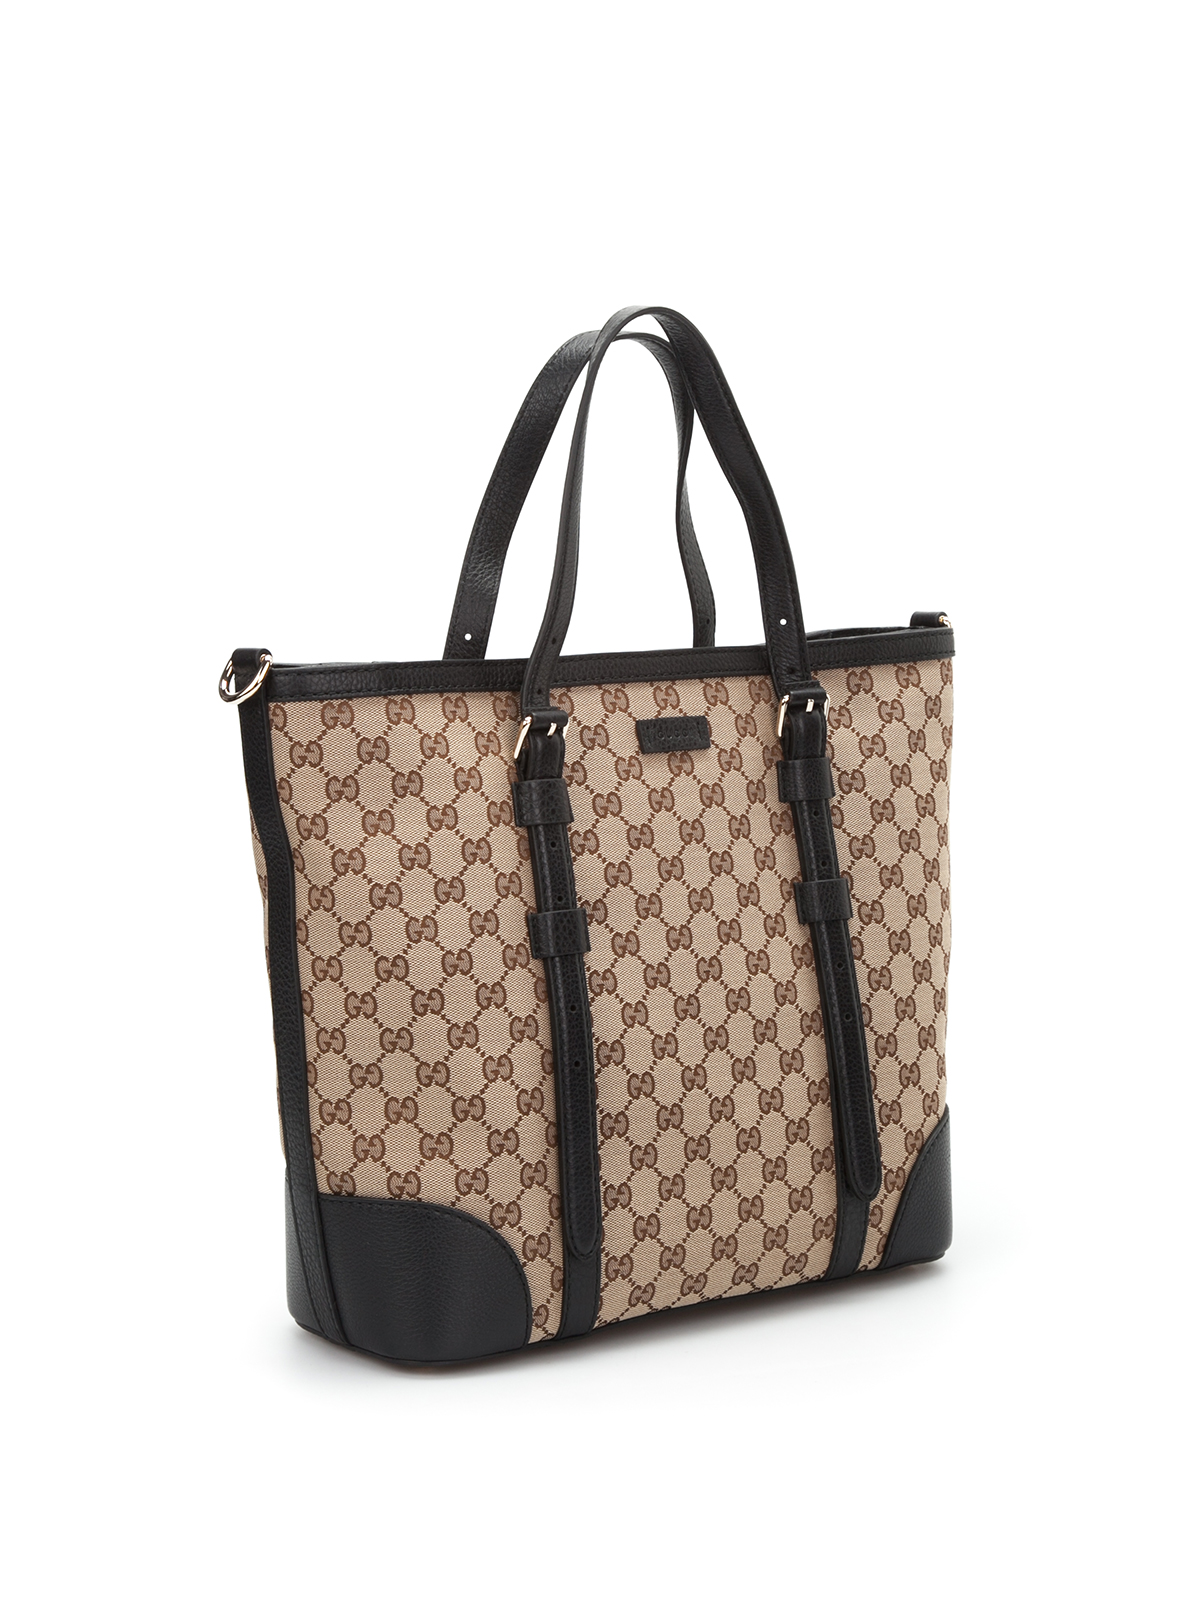 GG classic tote by Gucci - totes bags | Shop online at 0 - 387602 KQW1G 9769